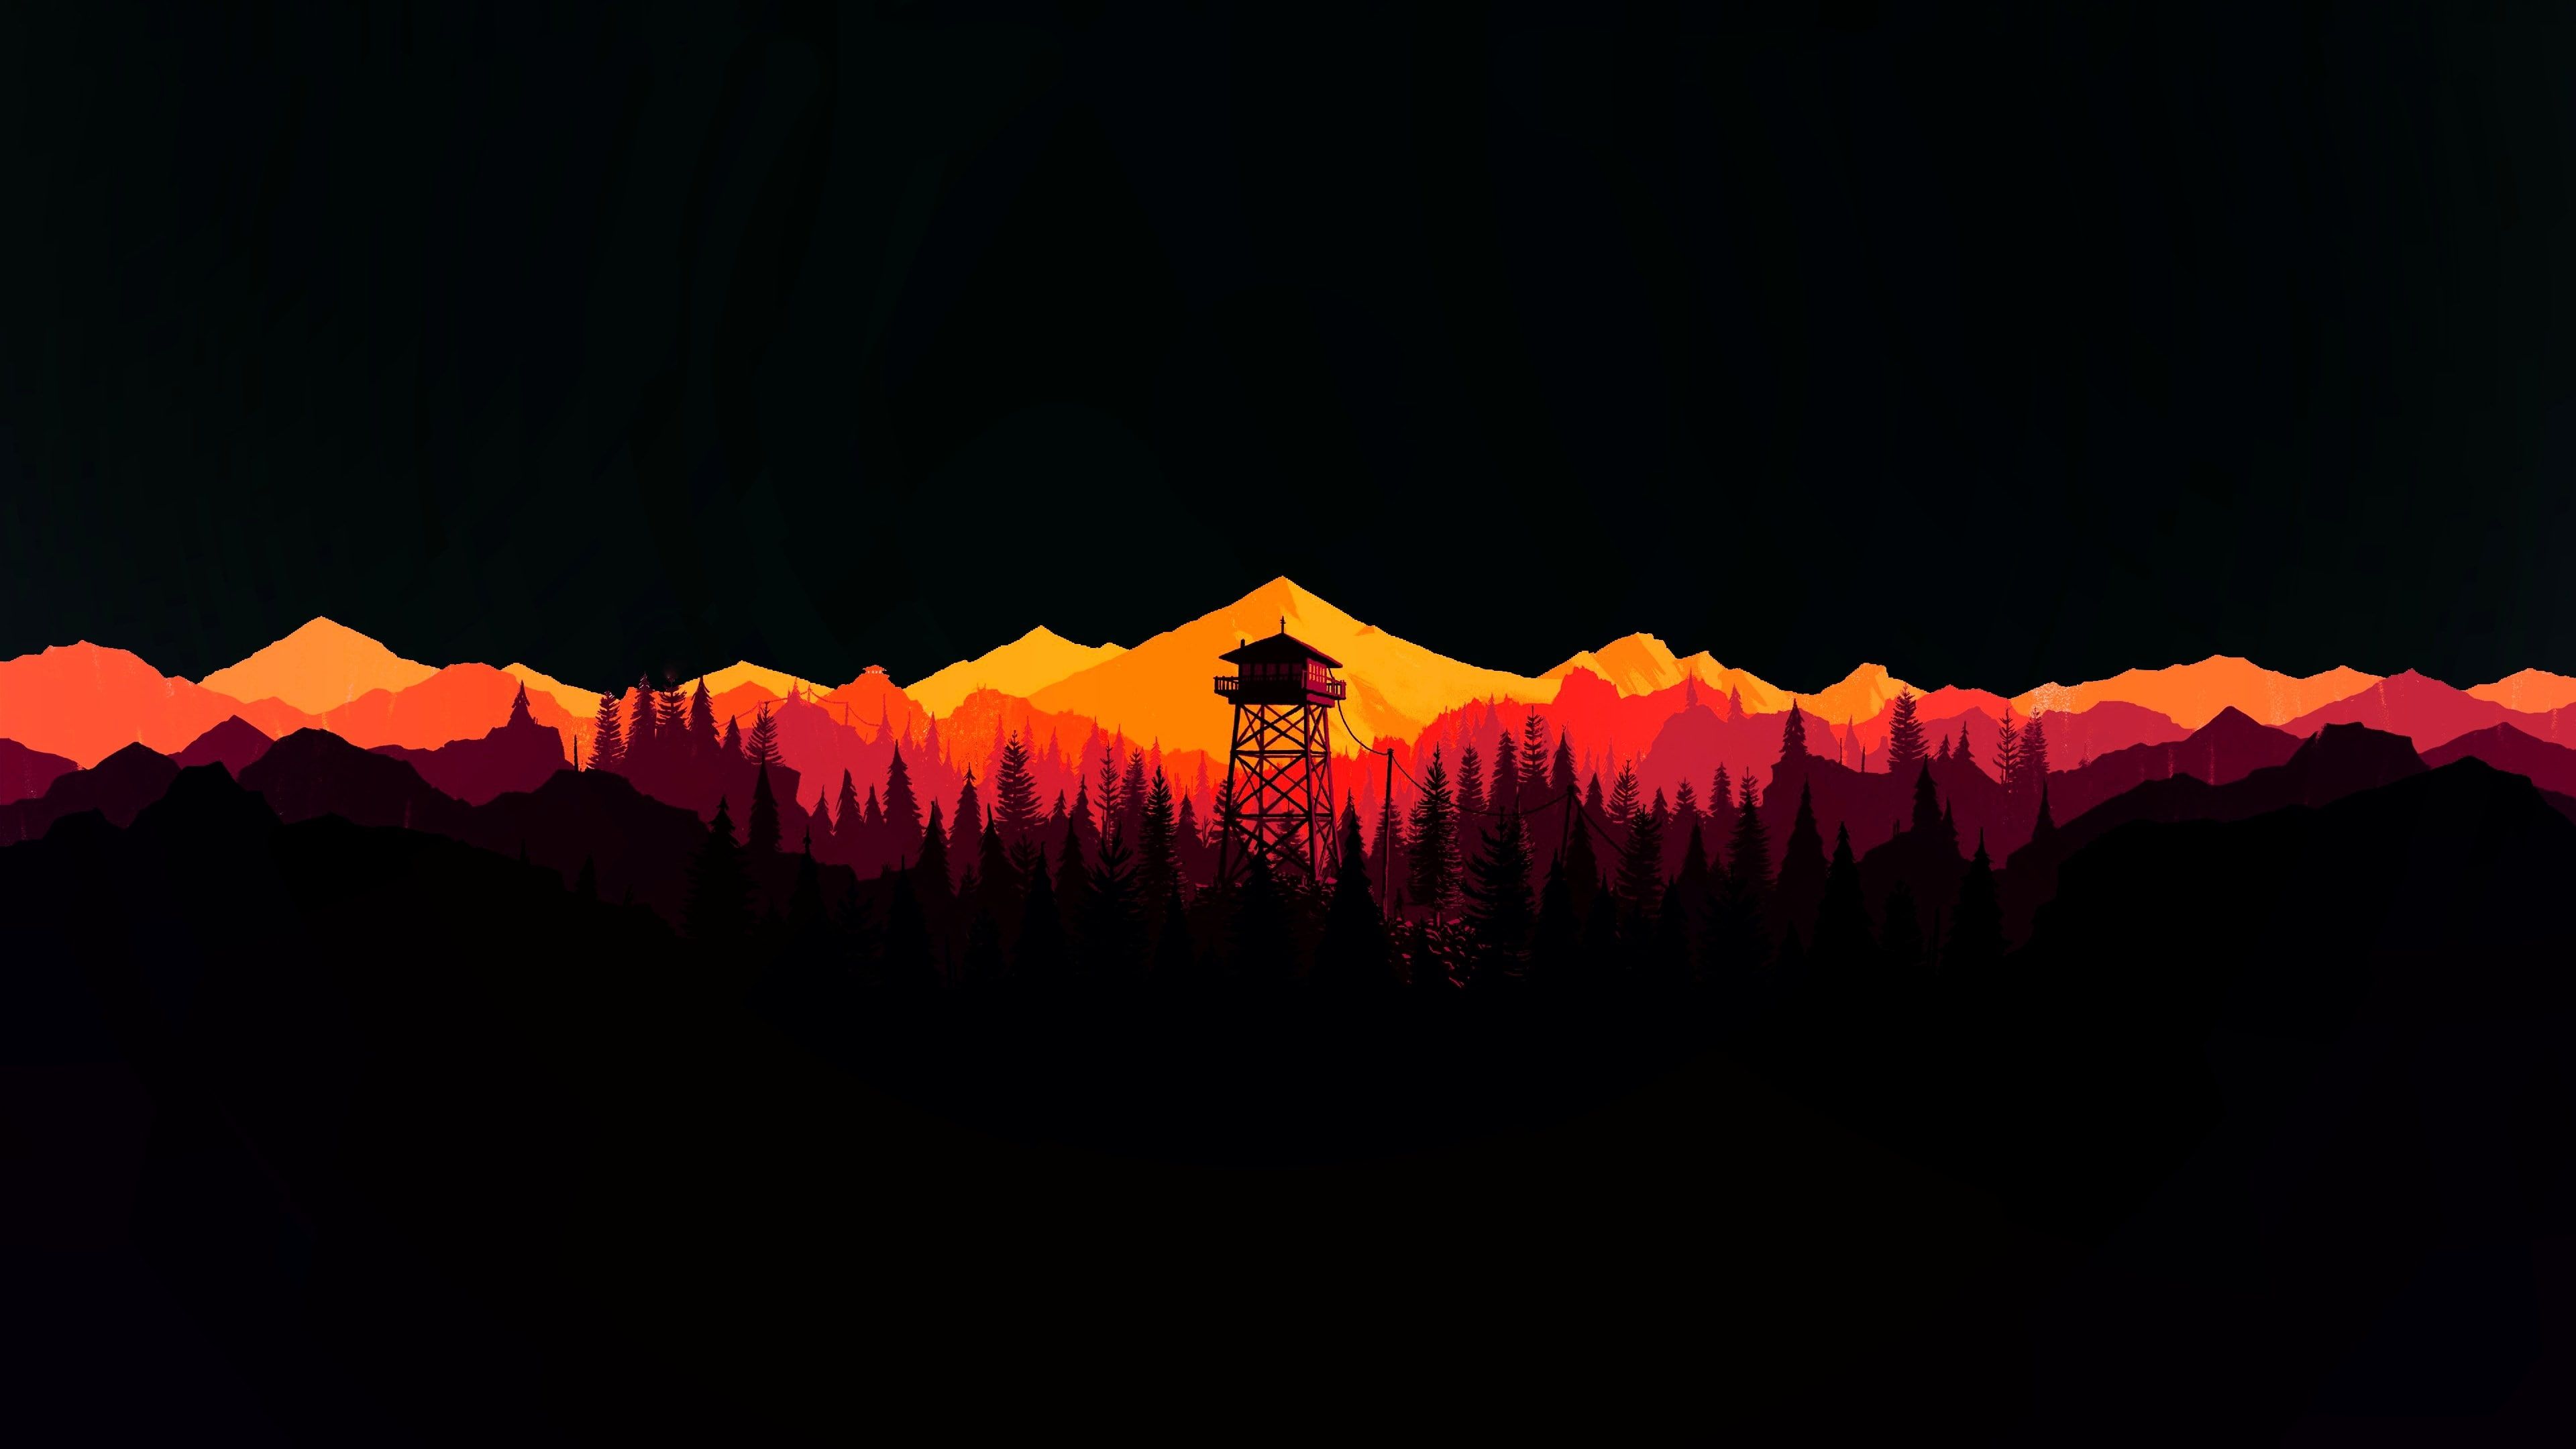 Watchtower in OLED style K #wallpaper #hdwallpaper #desktop. Computer wallpaper desktop wallpaper, Dual screen wallpaper, iPhone homescreen wallpaper